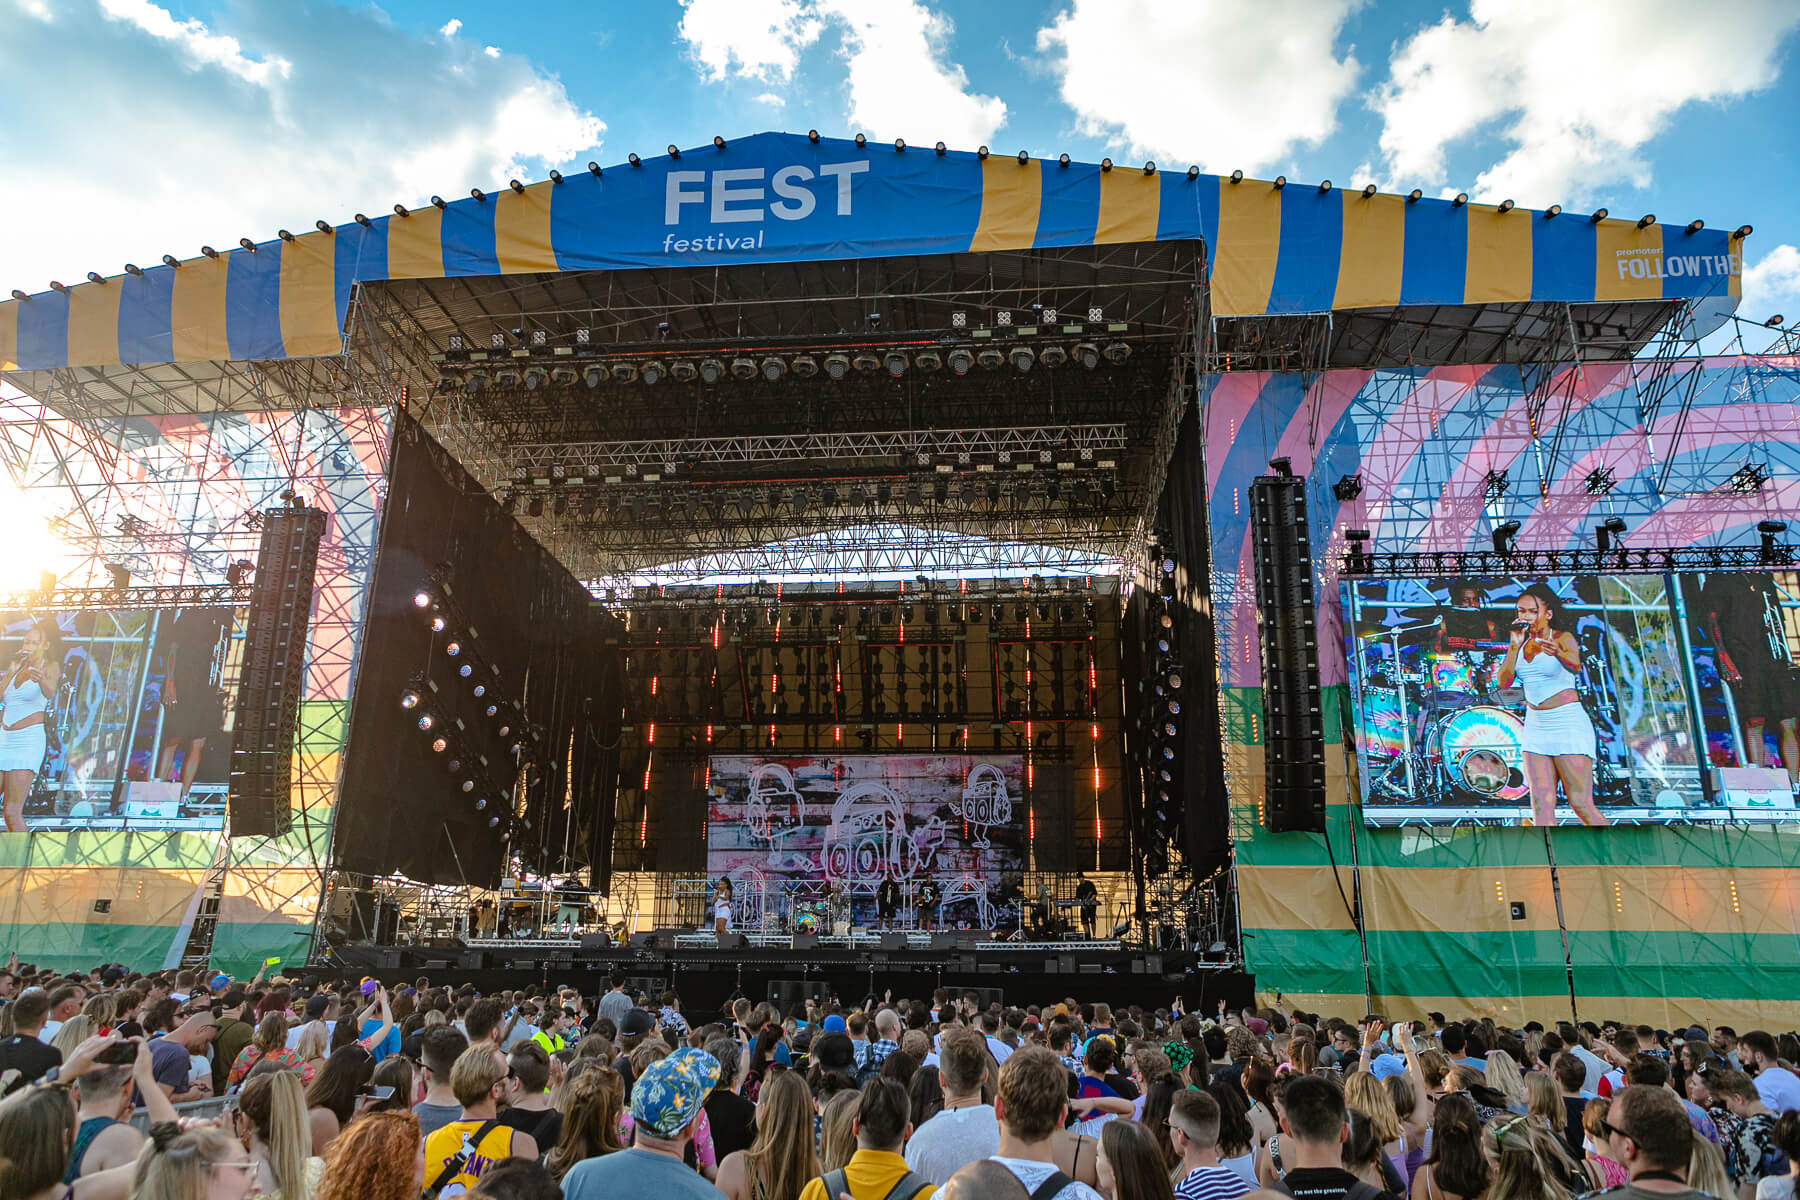 Main stage at Fest festival